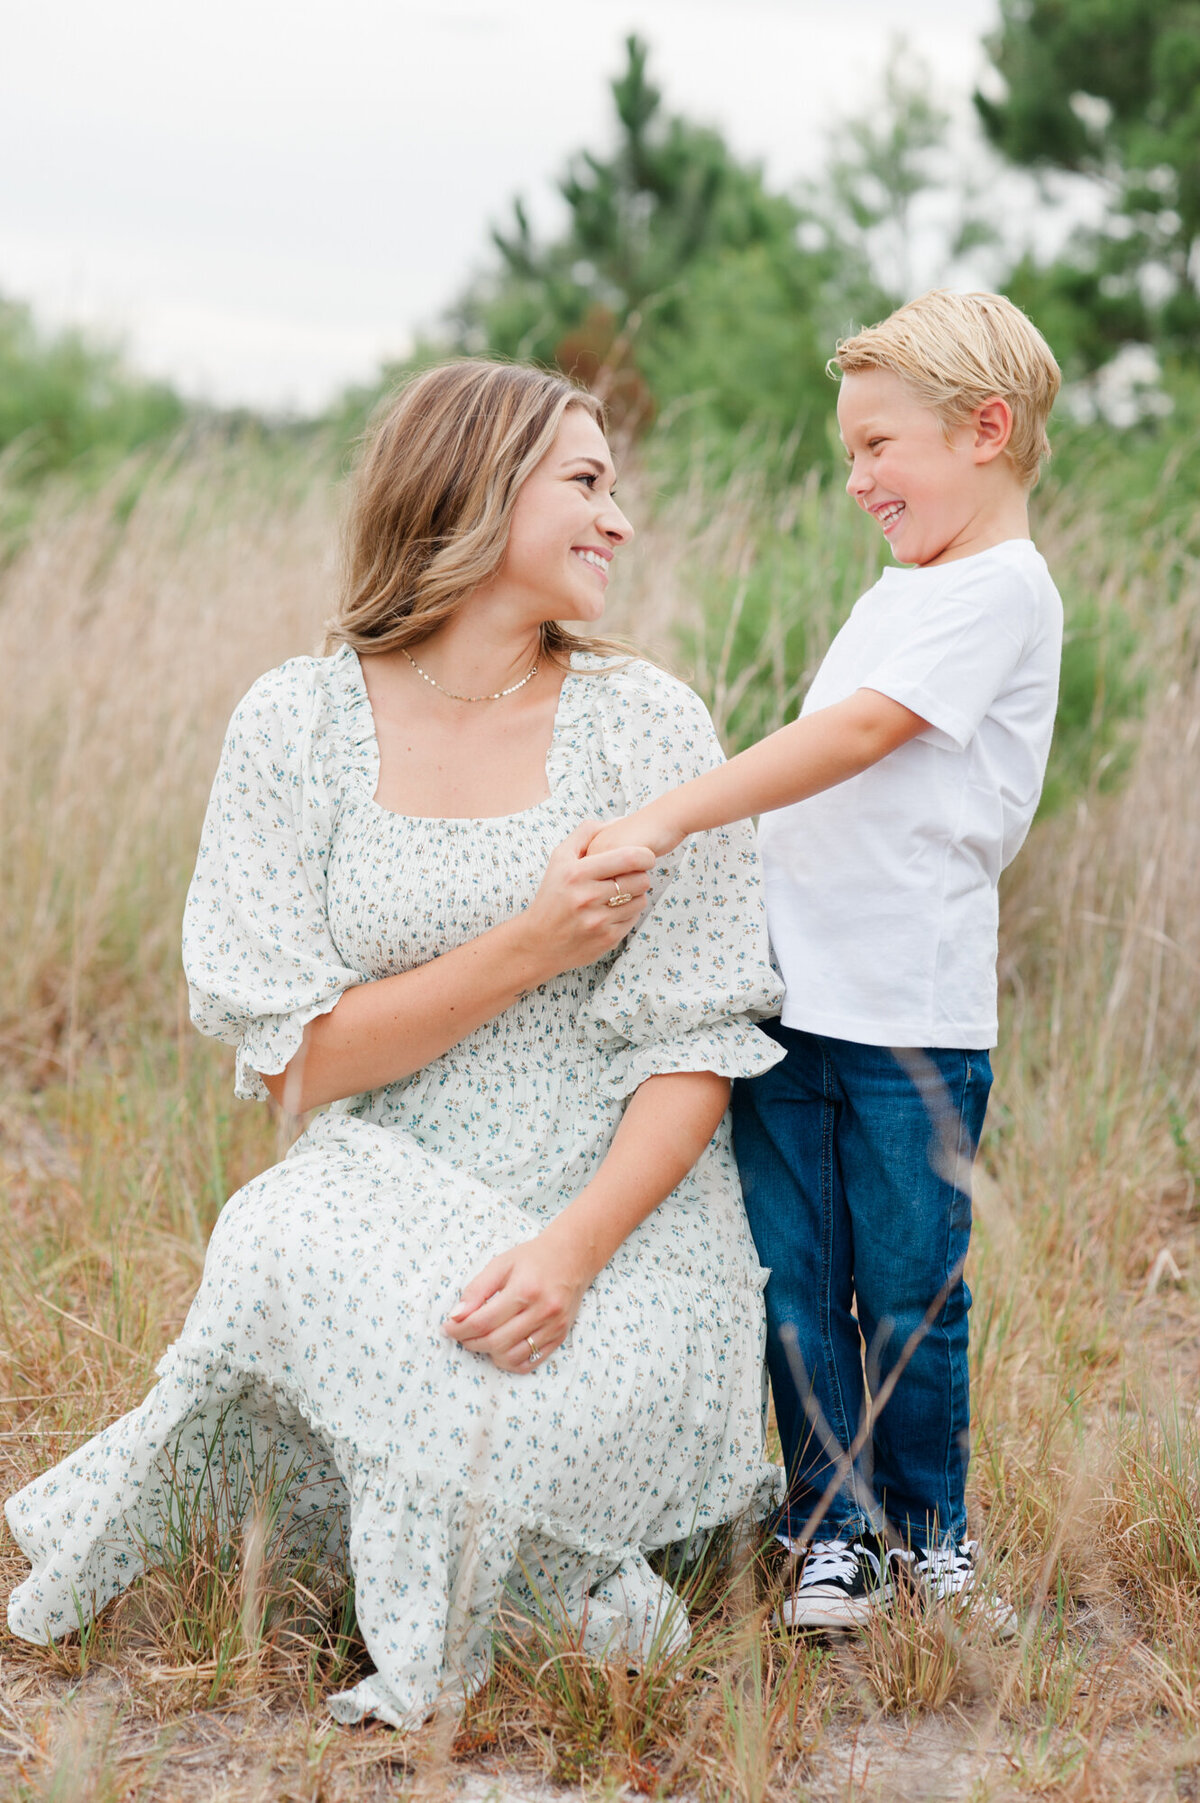 Mom and son holding hands and smiling at each other while standing in a tall grass field